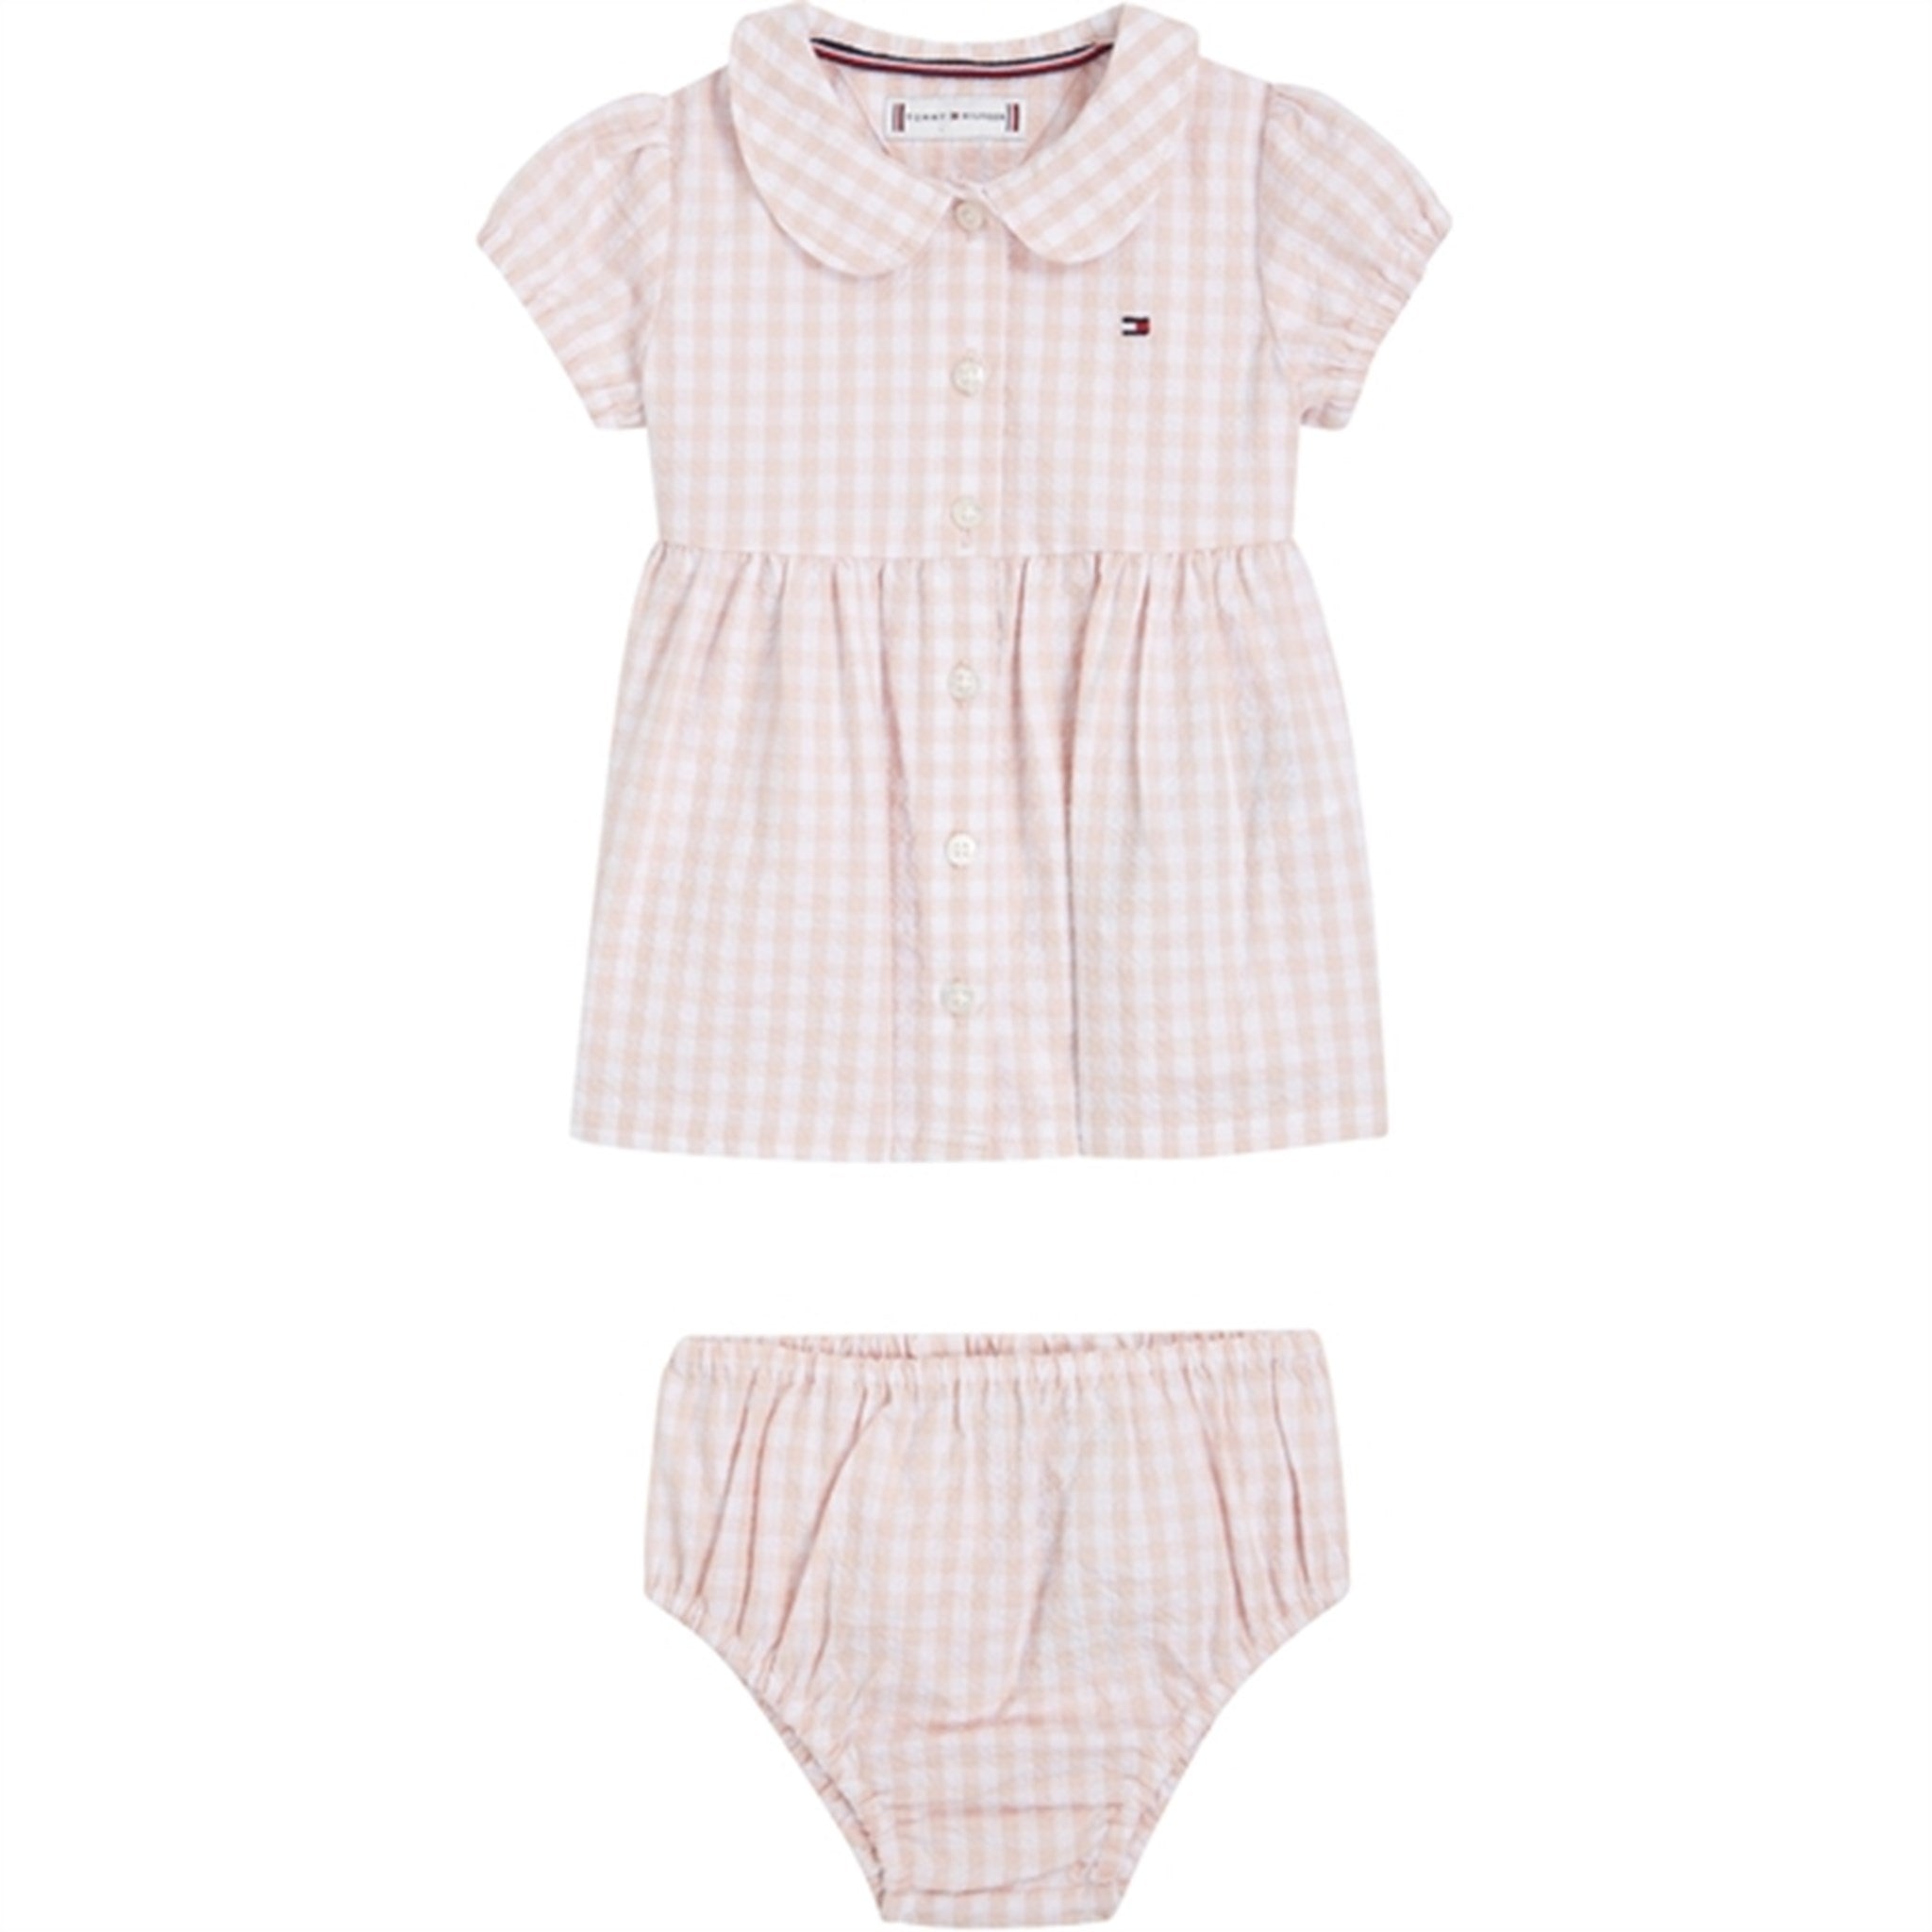 Tommy Hilfiger Baby Gingham Dress White / Pink Check